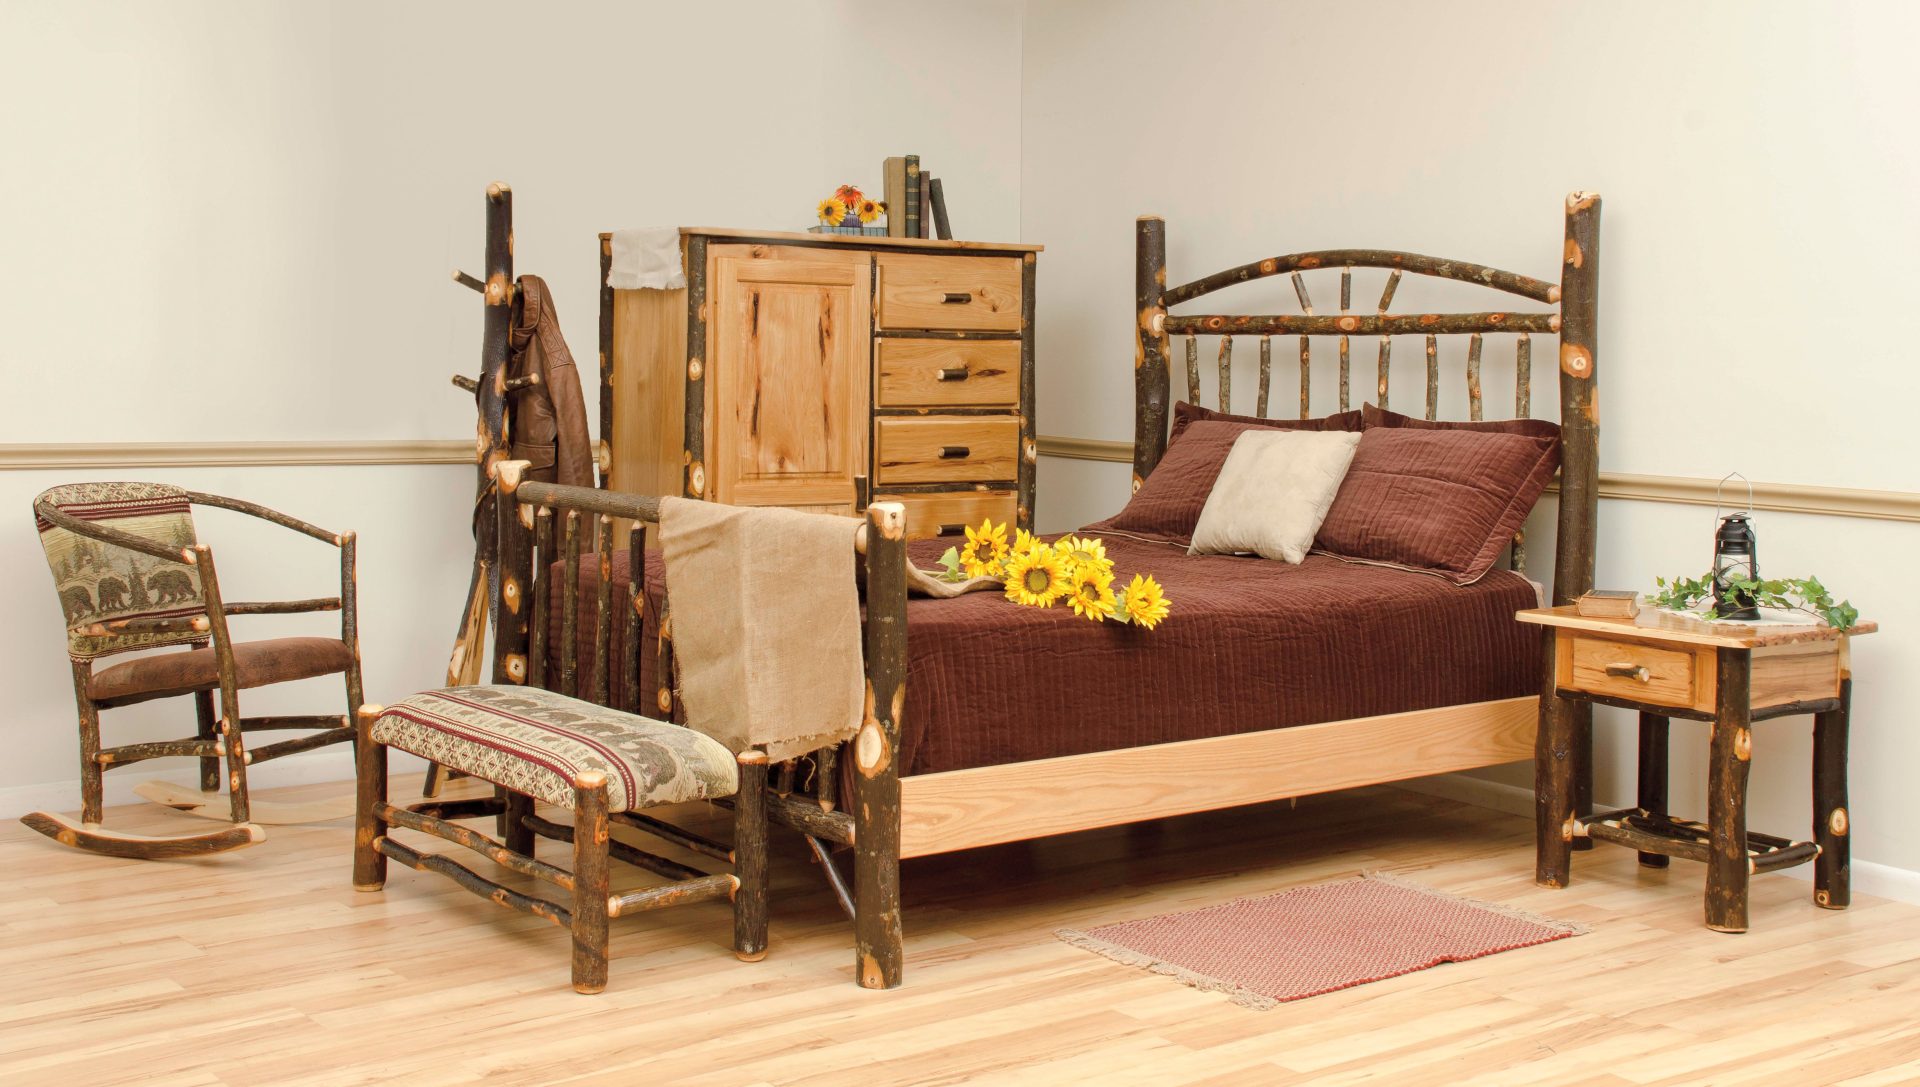 Rustic Hickory Wagon Wheel Bedroom Set – King or Queen Size Available